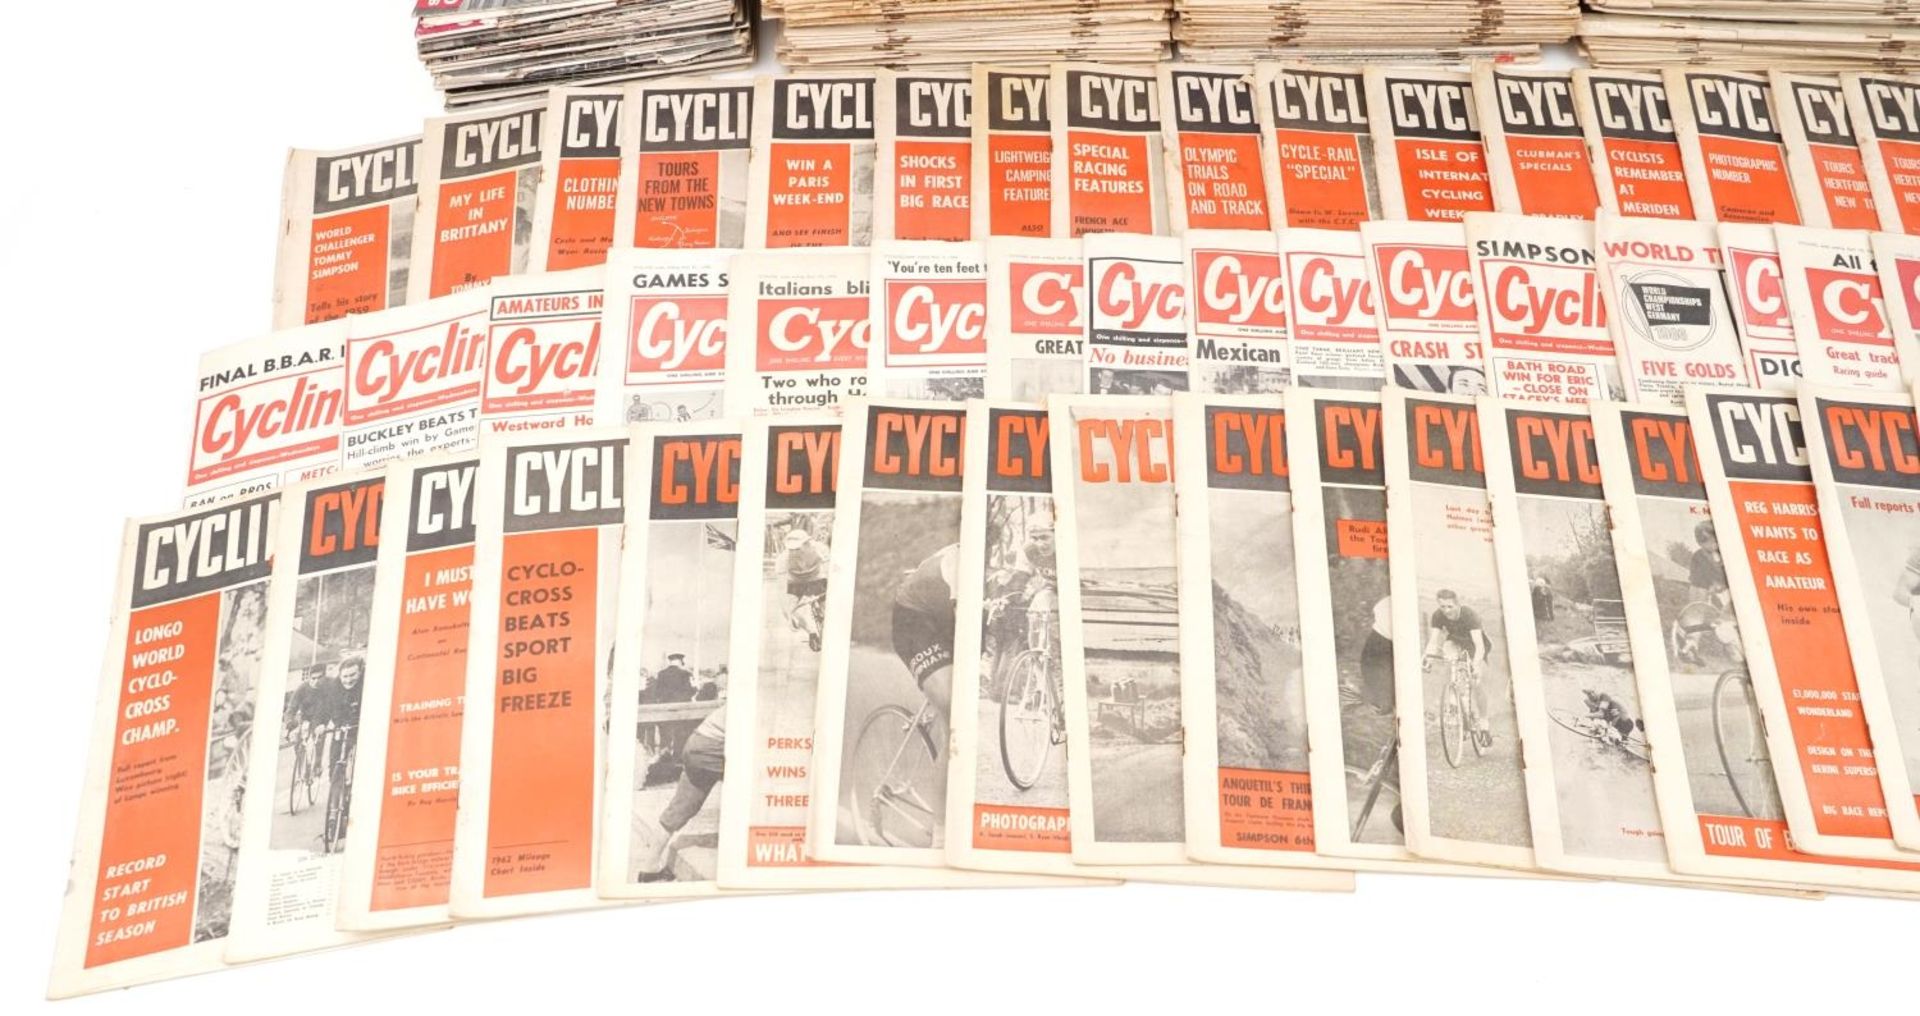 Large collection of vintage cycling interest magazines including Cycling & Mopeds, Cycling Journal - Image 4 of 5